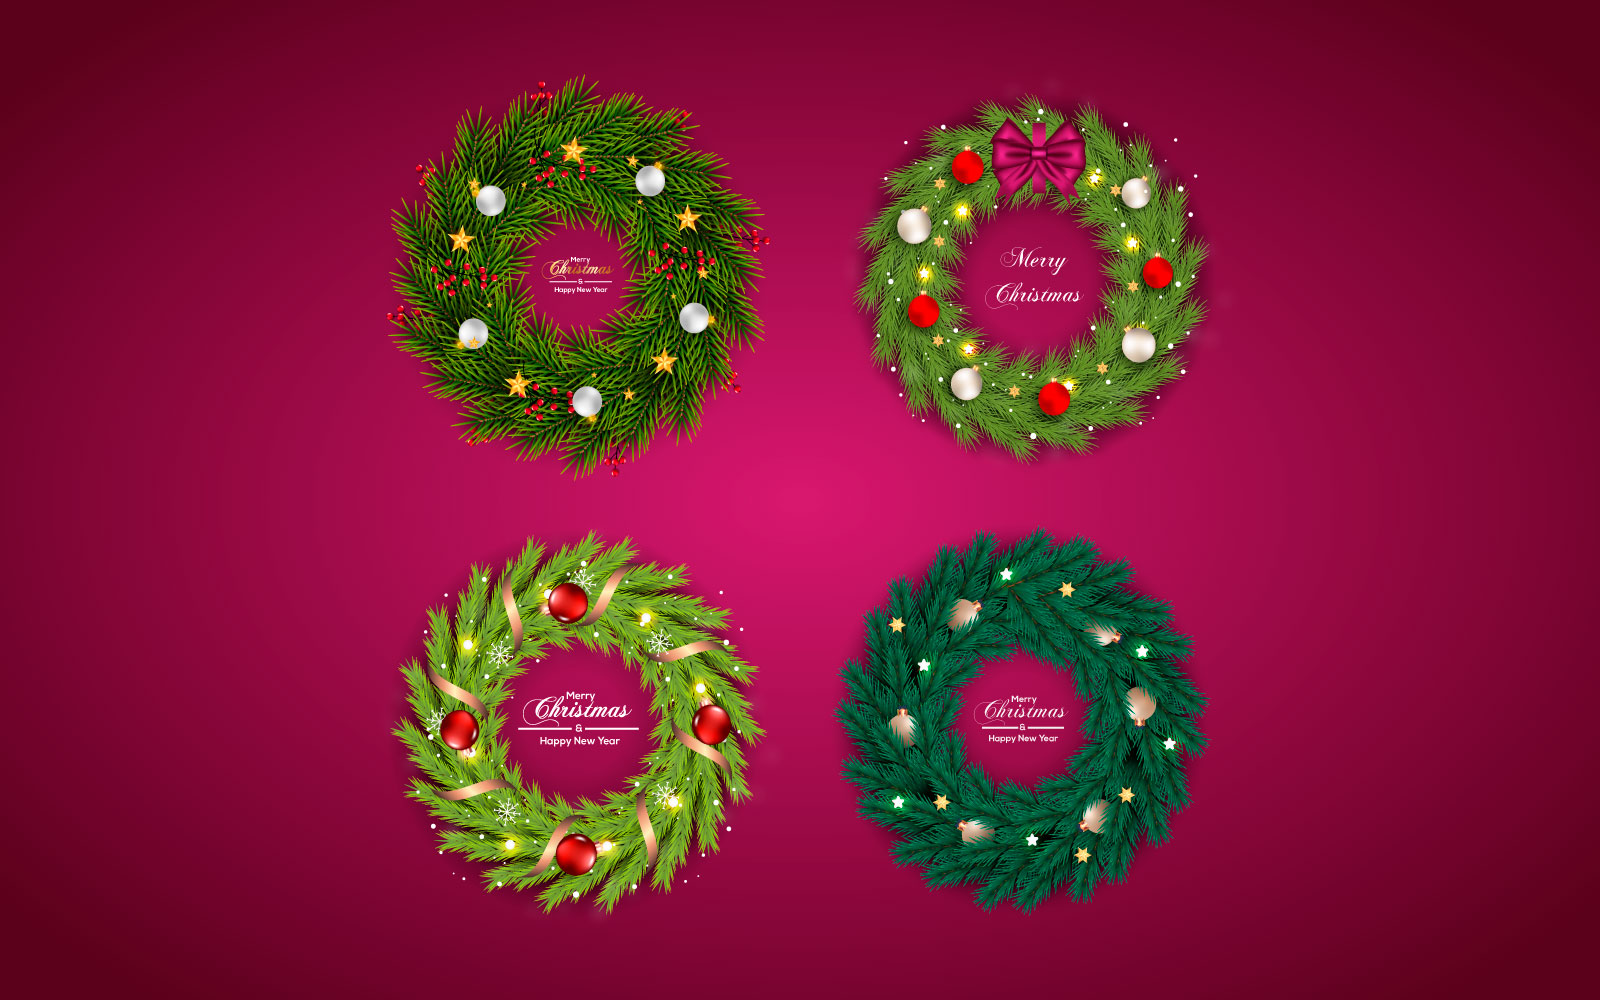 Christmas wreath with decorations on color background with pine branch and star